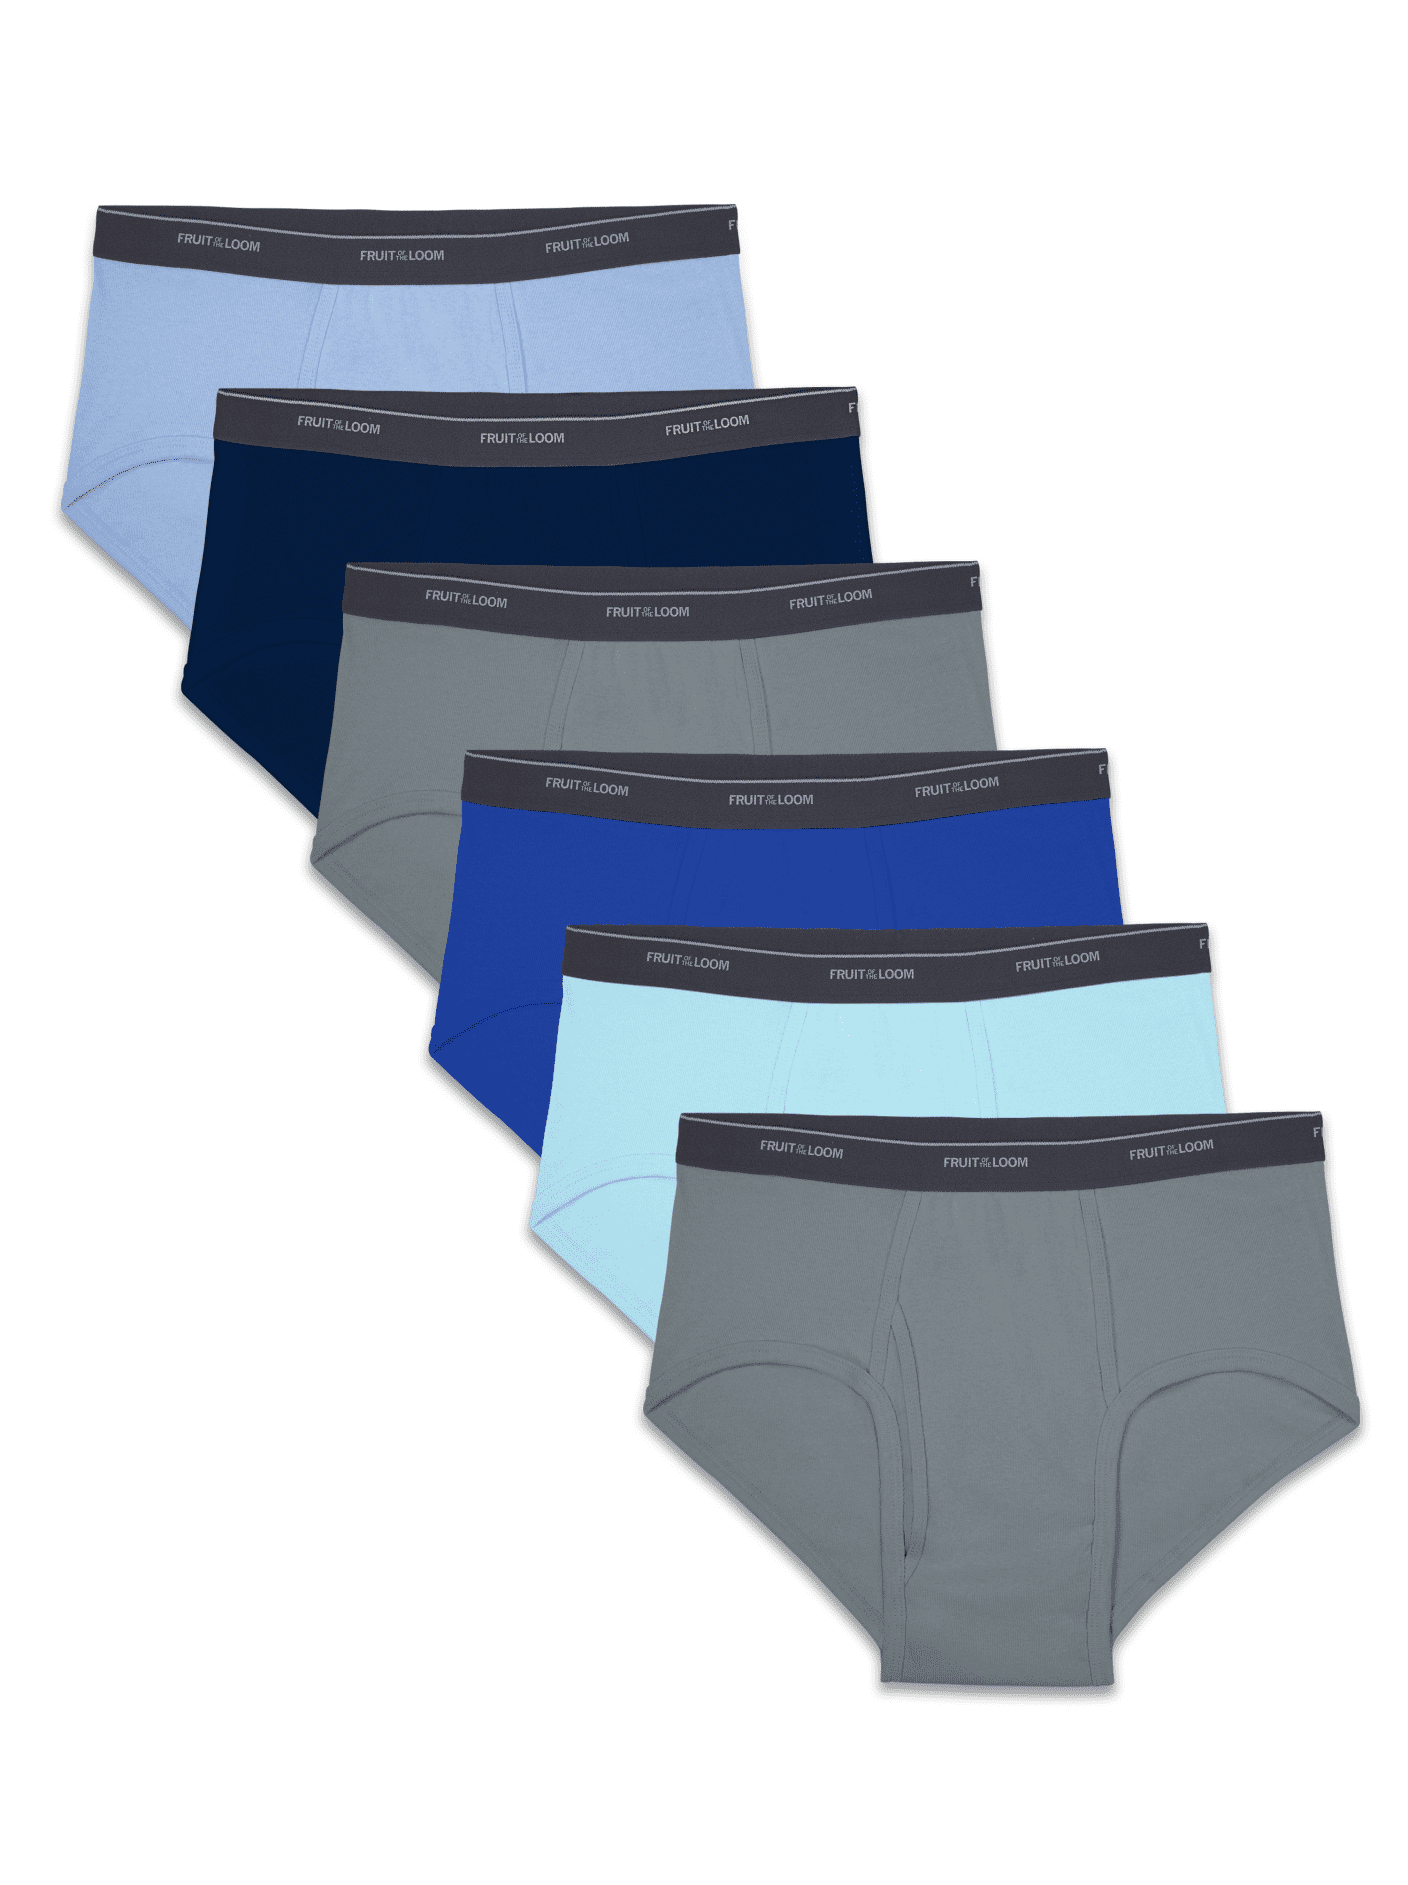 Men's Fashion Briefs, Extended Sizes Assorted 6 Pack